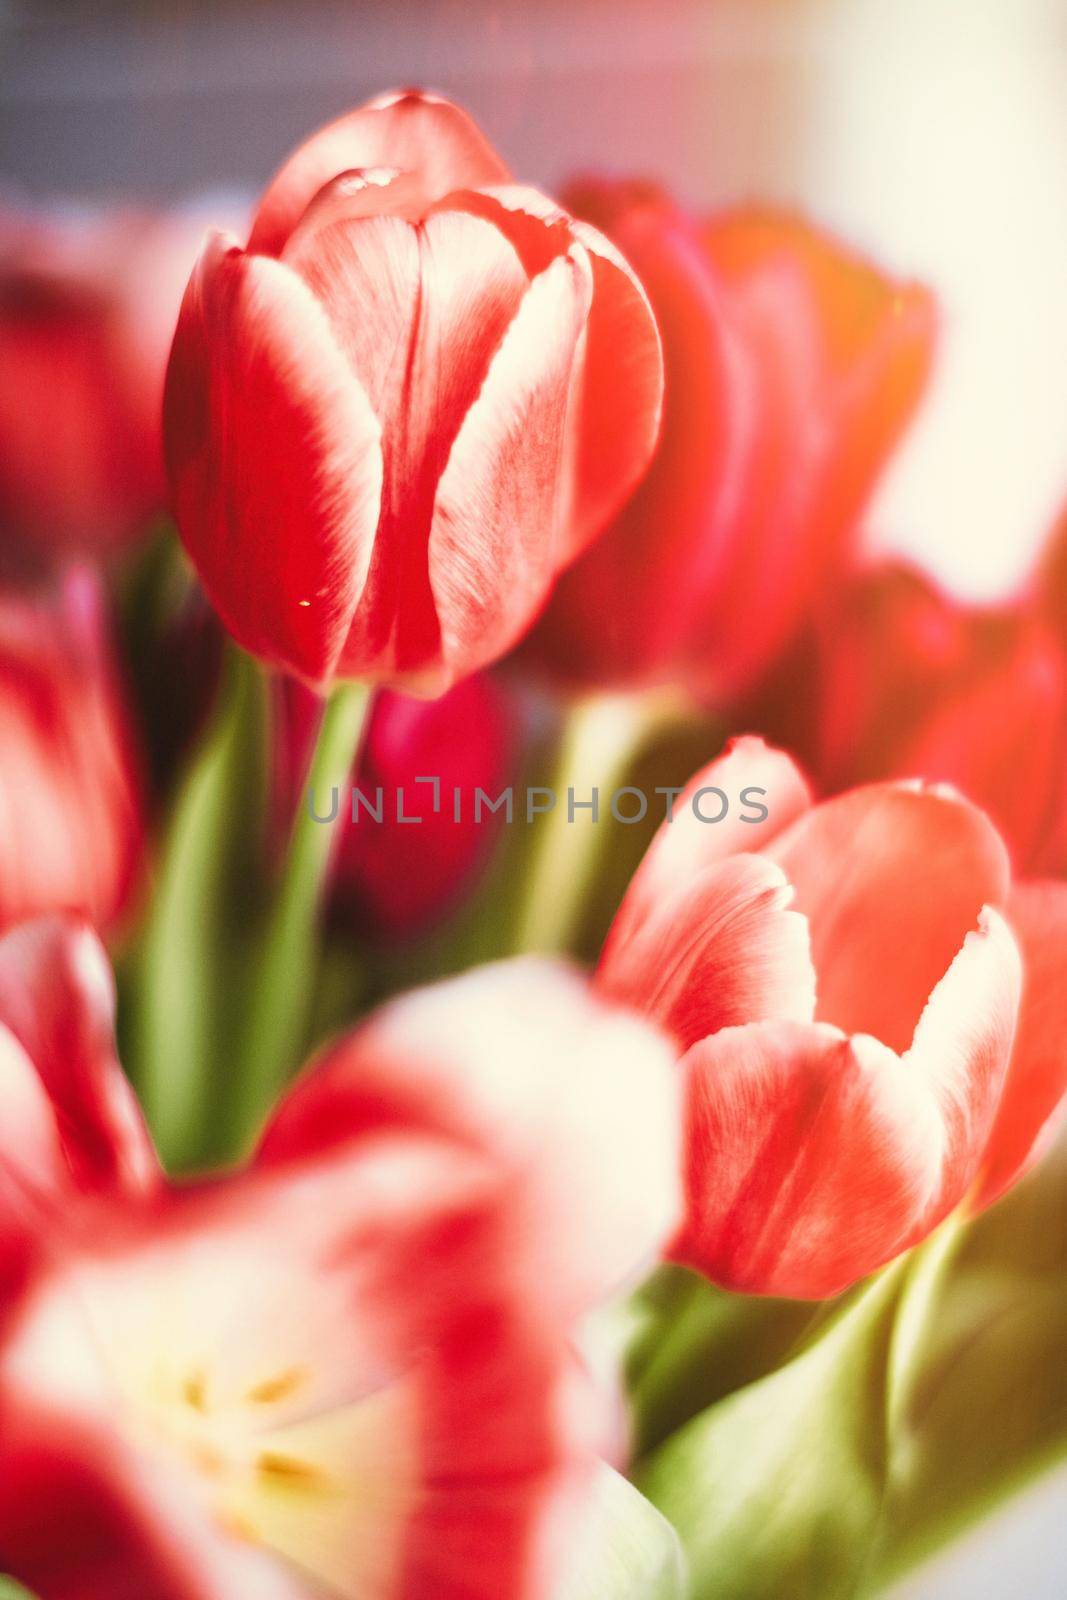 Bouquet of tulips in bloom - mothers day, springtime and international womens day concept. Brighten up your home with flowers